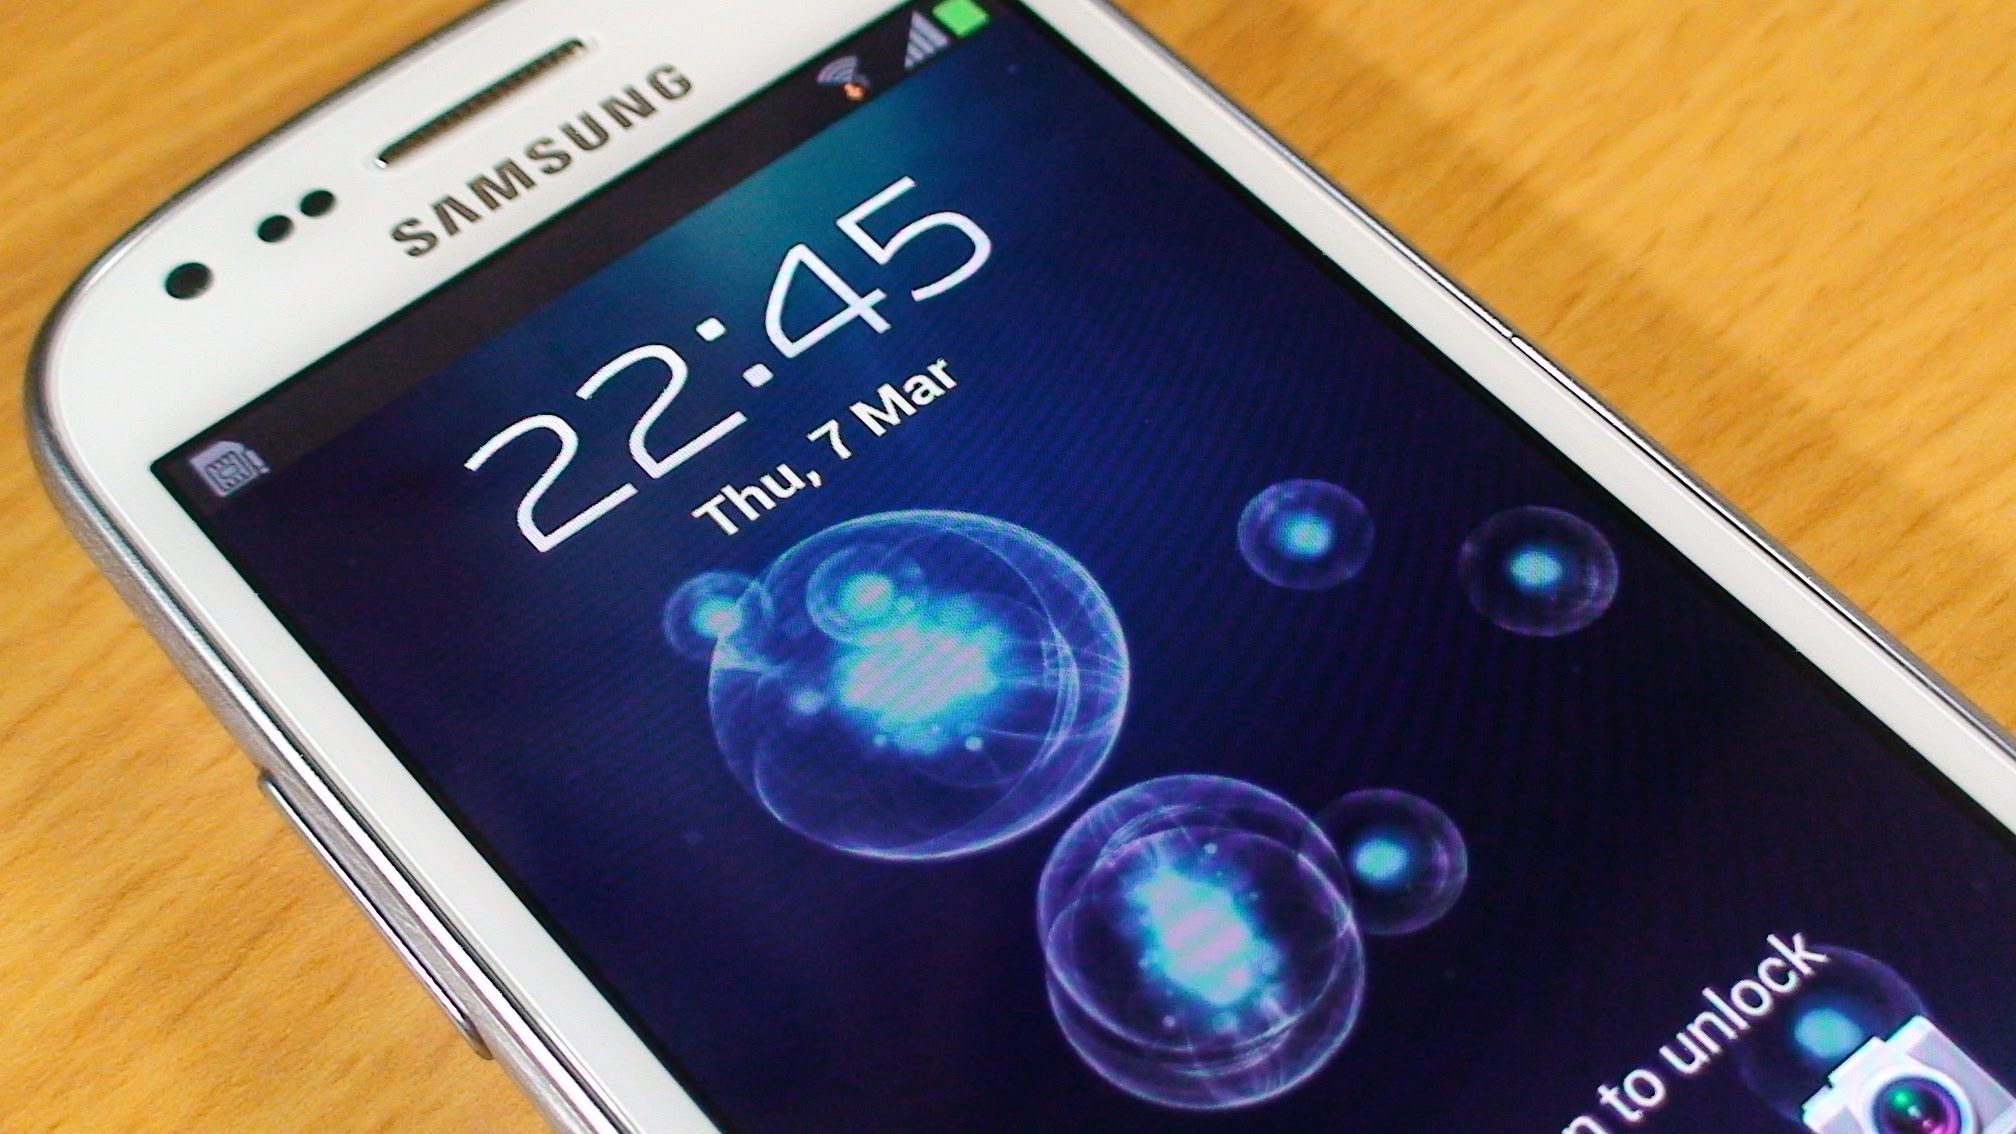 How to set up wallpaper on Samsung Galaxy S3 Mini - YouTube